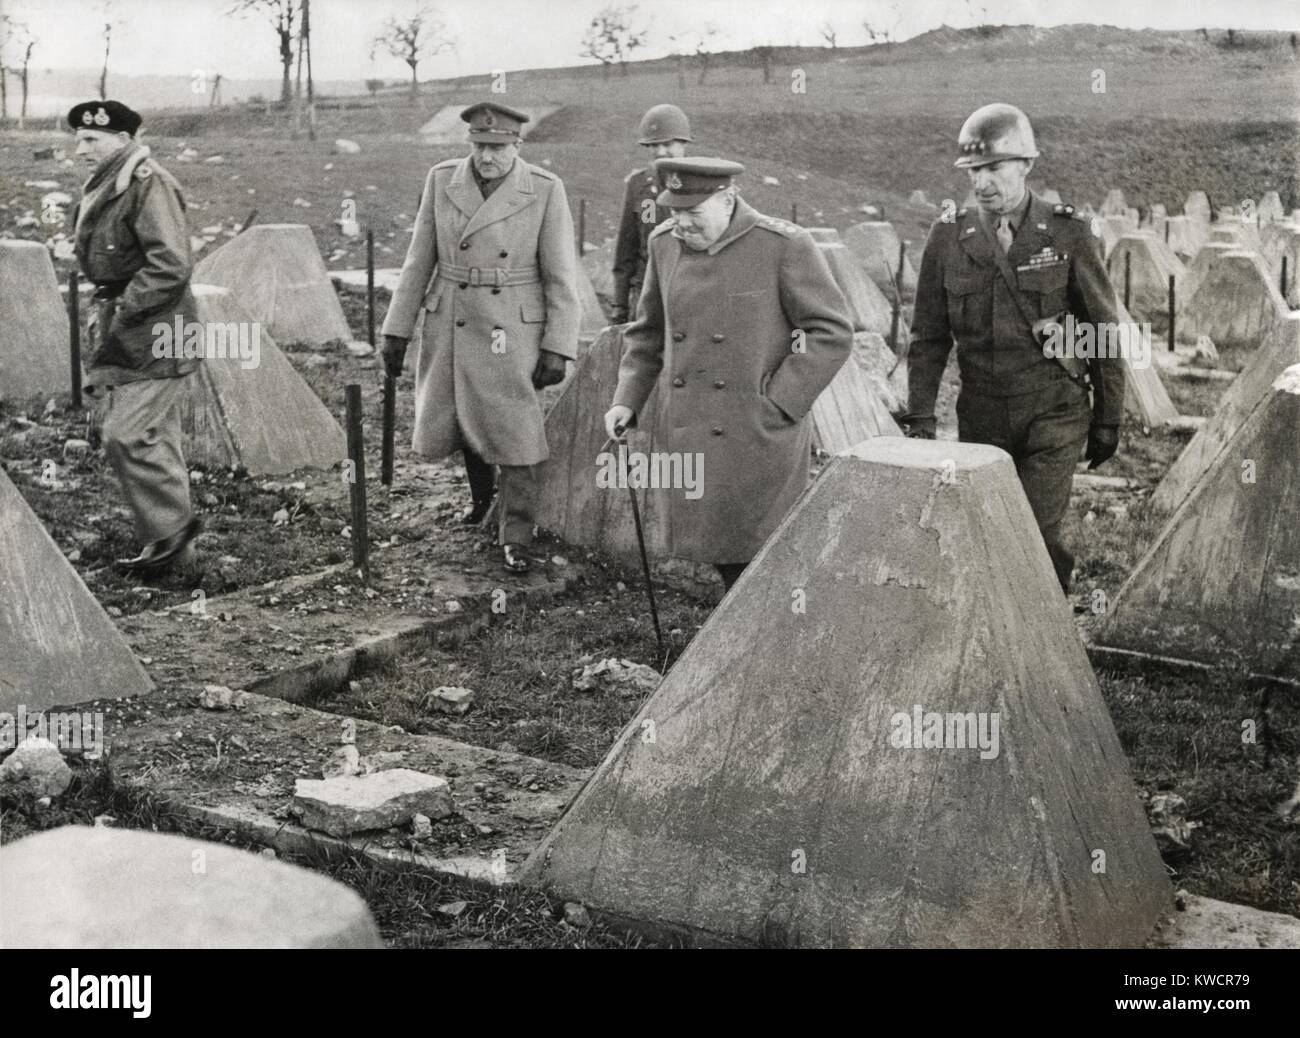 Churchill and Commanders visit the Western Front on March 4, 1945. Winston Churchill walked in the 'dragon's teeth' of the Siegfried Line near Aachen, with him, L-R: Field Marshall Montgomery, Sir Allen Brooke, unidentified U.S. Officer, Churchill, and Lt. General William Simpson of 9th American Army. - (BSLOC 2014 17 39) Stock Photo